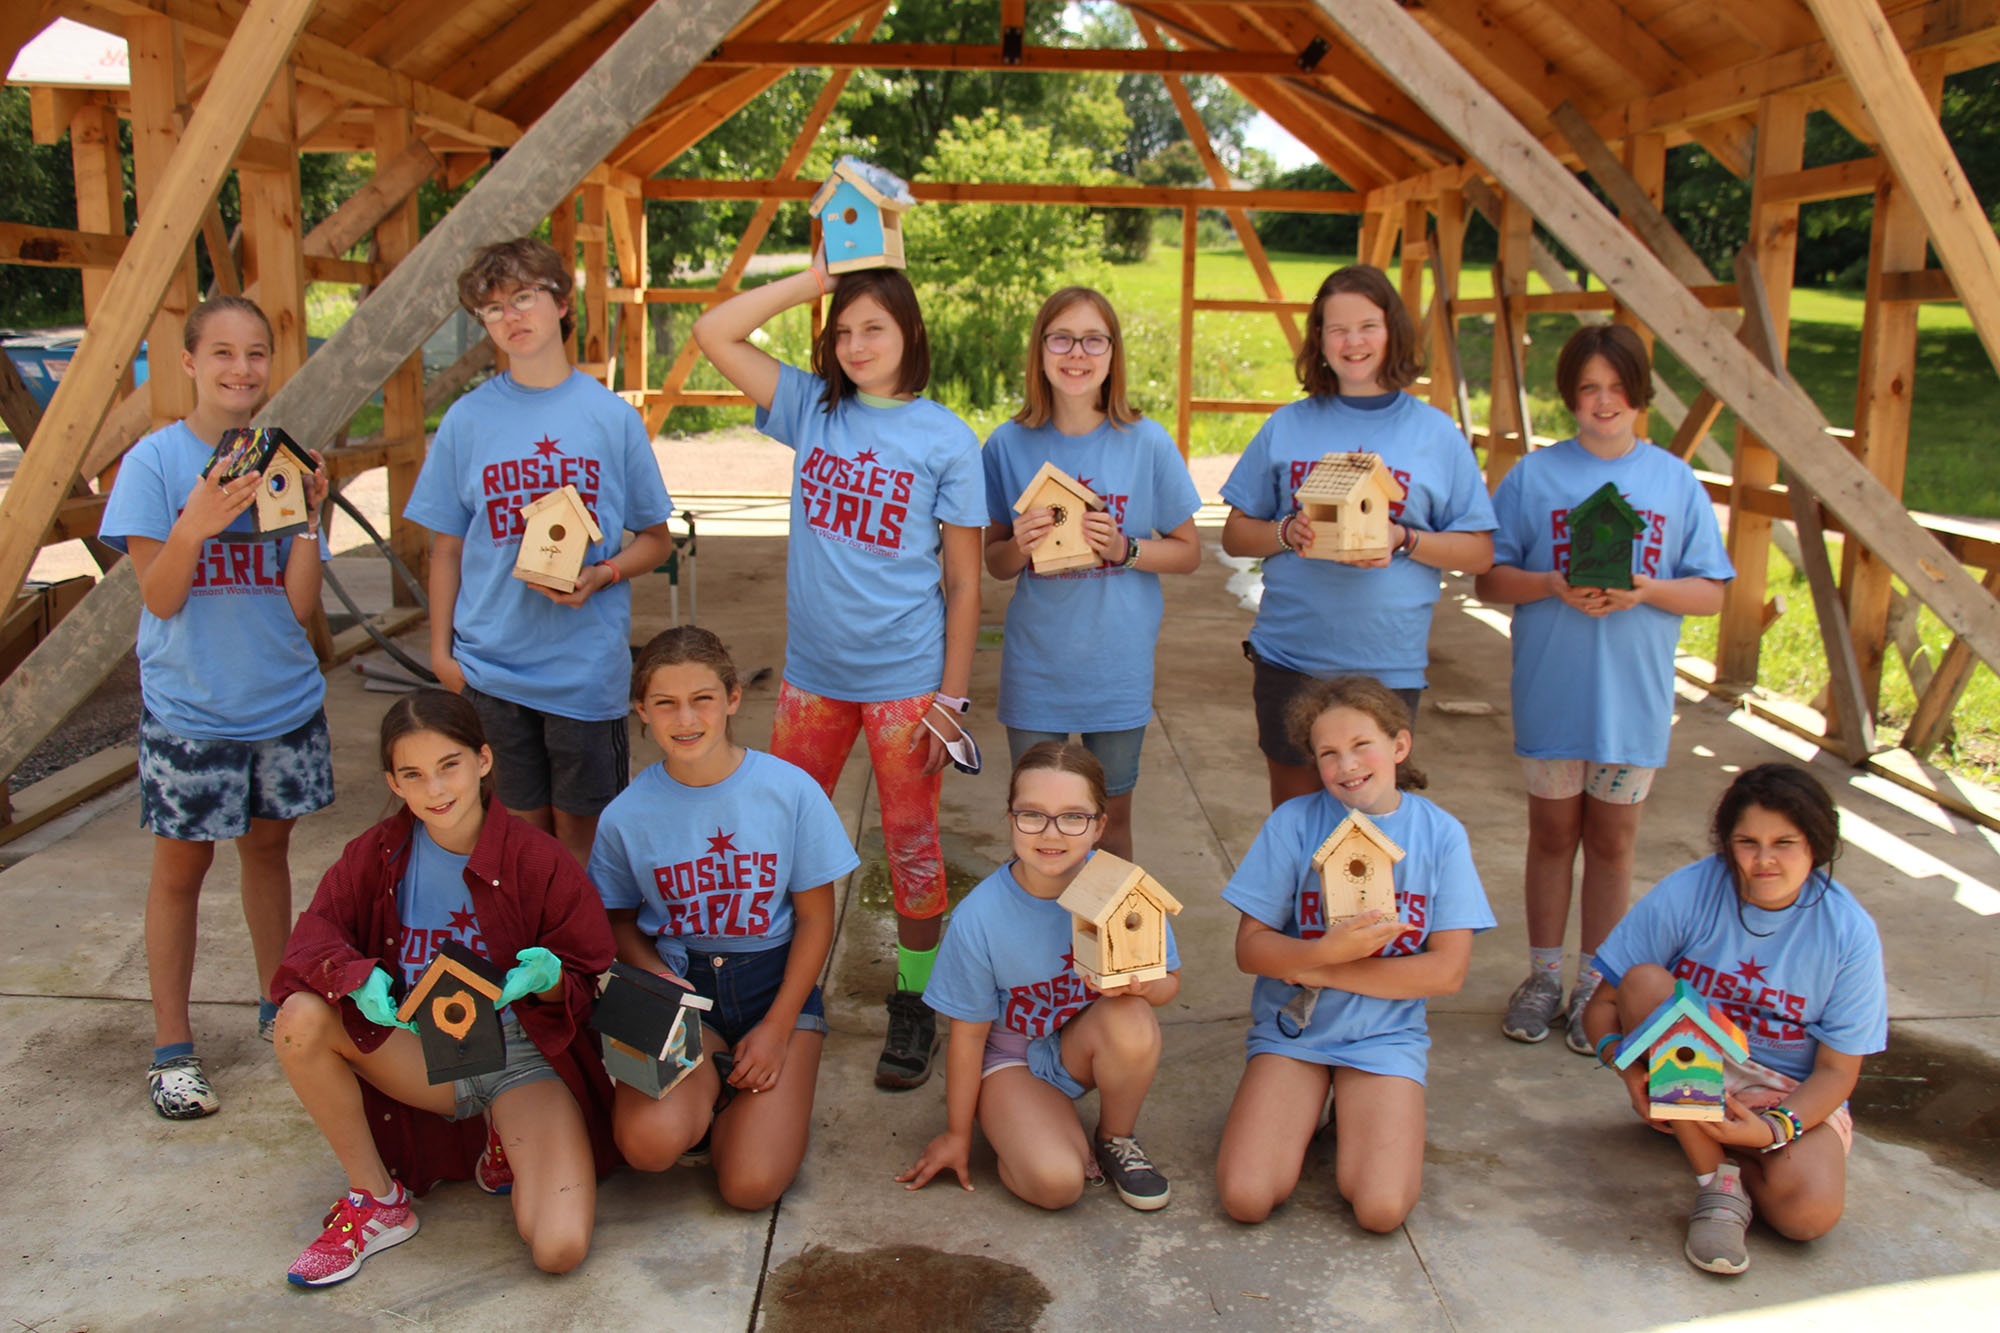 osie’s Girls campers pose with their hand built, decorated birdhouses.